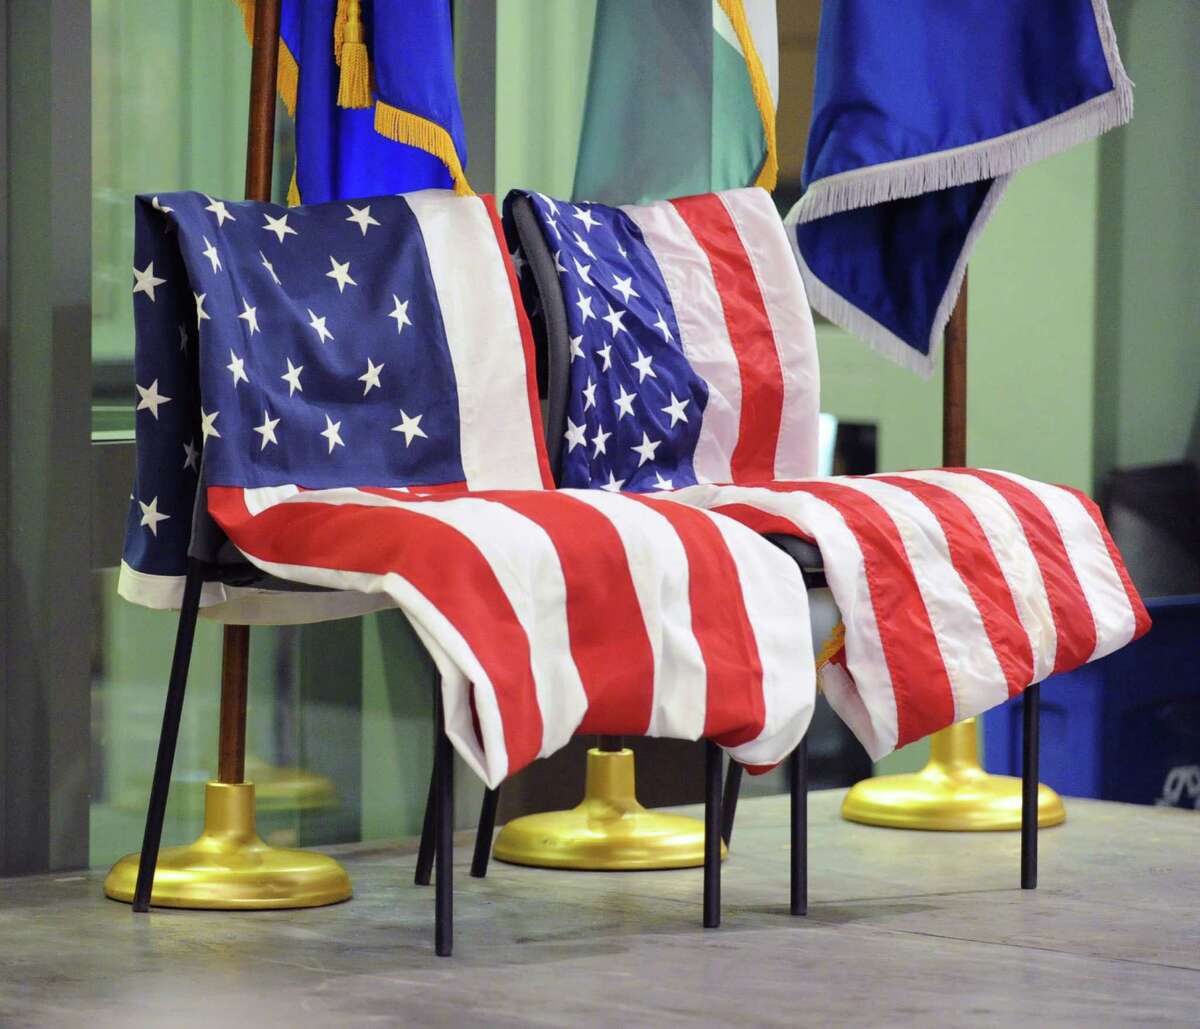 Two chairs are draped with American Flags honoring fallen servicemen, Lance Cpl. Joseph Schiano of the U.S. Marine Corps and First Sgt. Edwin Rivera of the Connecticut National Guard during the welcoming home ceremony for servicemen put on by the Greenwich Military Covenant of Care at Greenwich Police Headquarters, Thursday night, Dec. 20, 2012.